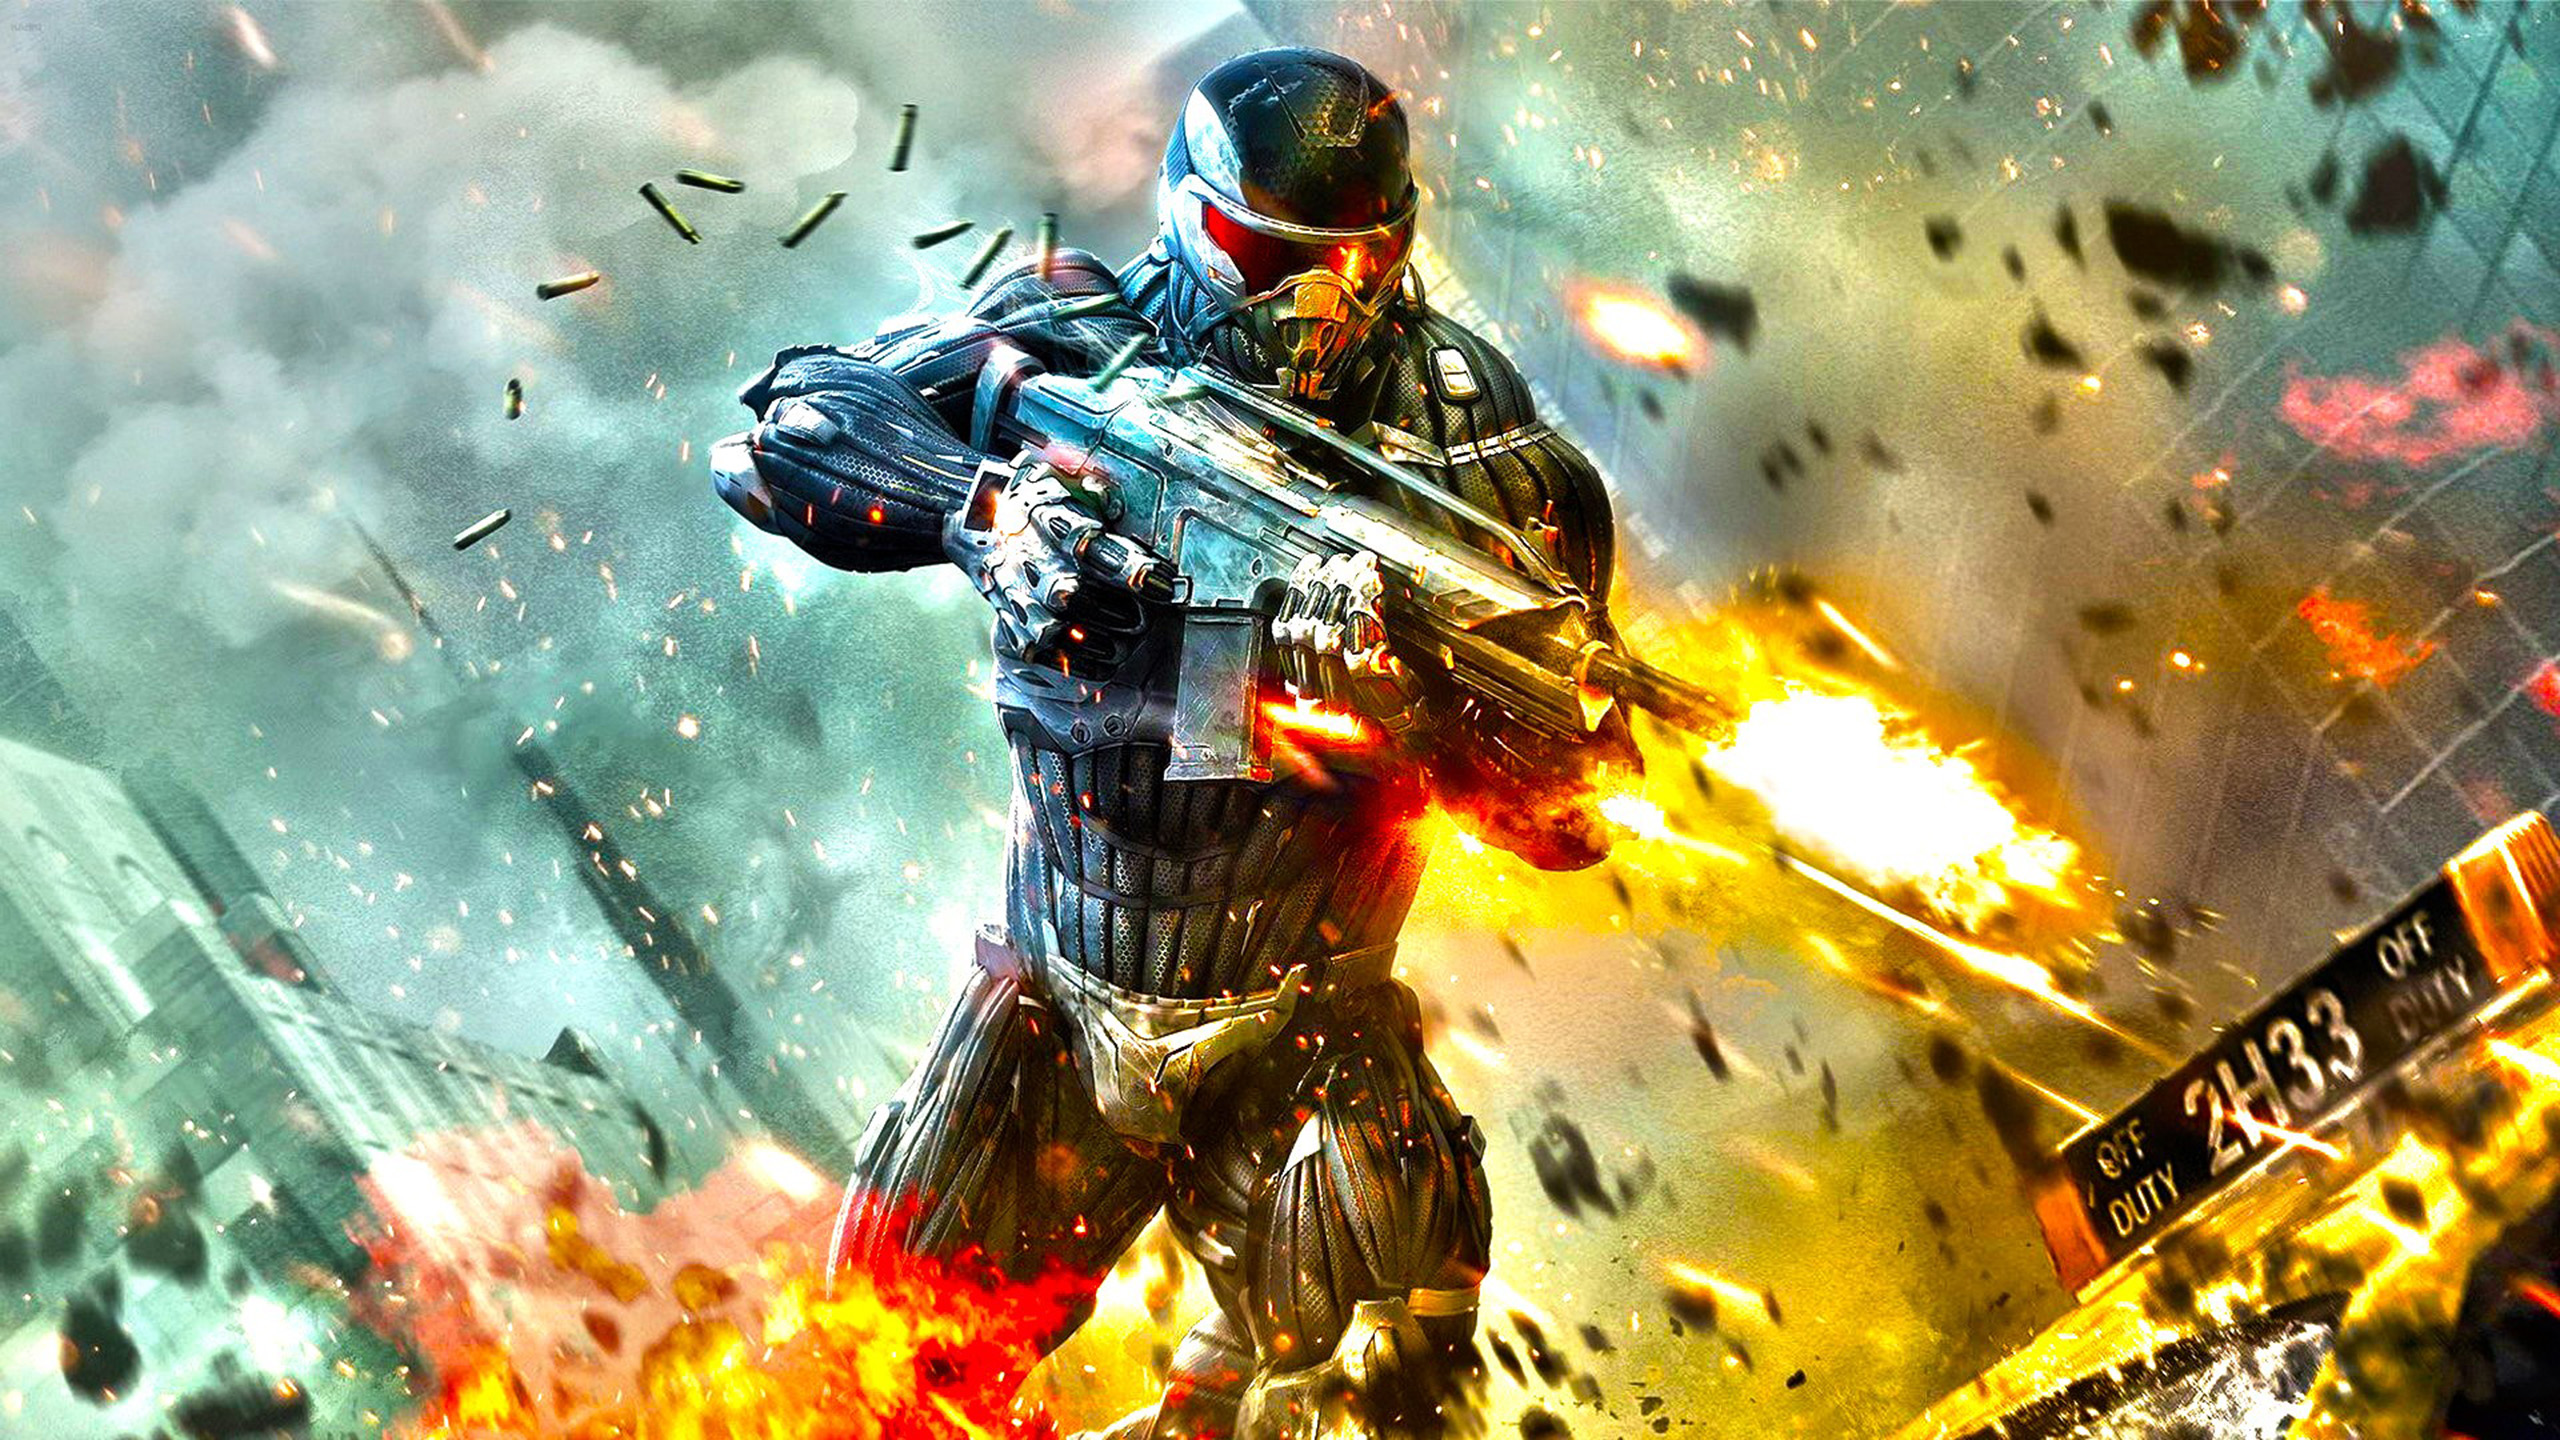 General 2560x1440 Crysis Crysis 2 video games weapon assault rifle Crytek Electronic Arts first-person shooter